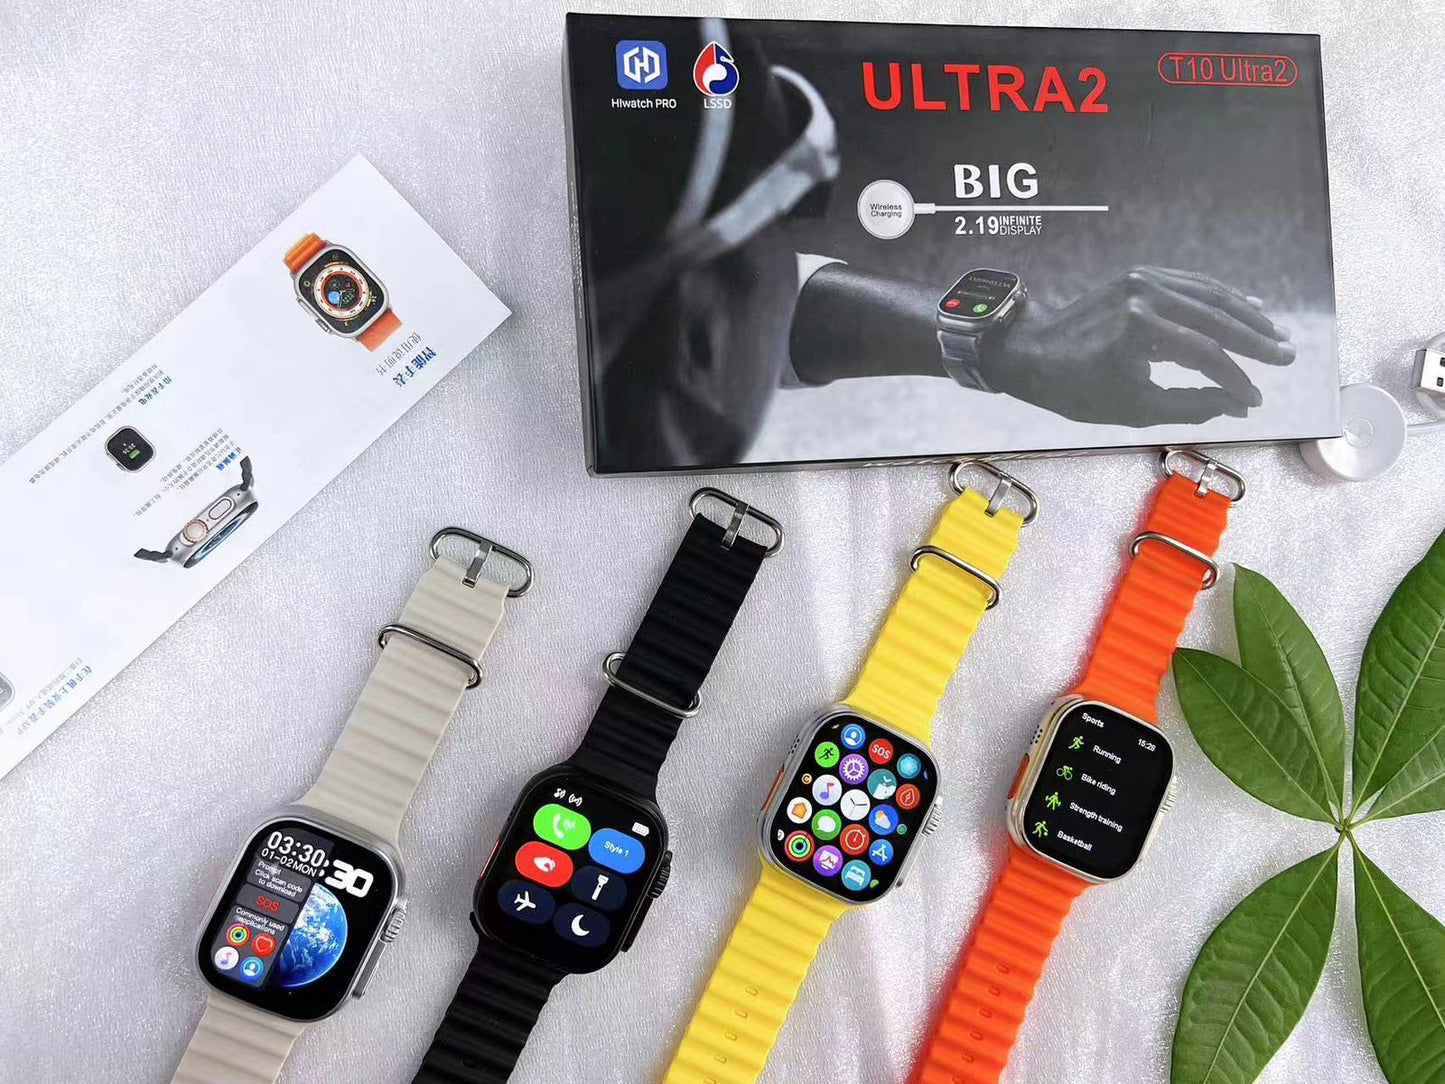 T10 Ultra 2 Smart Watch - Series 9 Smartwatch With 2.09inch HD Display, 49mm Dial, Bluetooth Calling And Sleep Monitoring